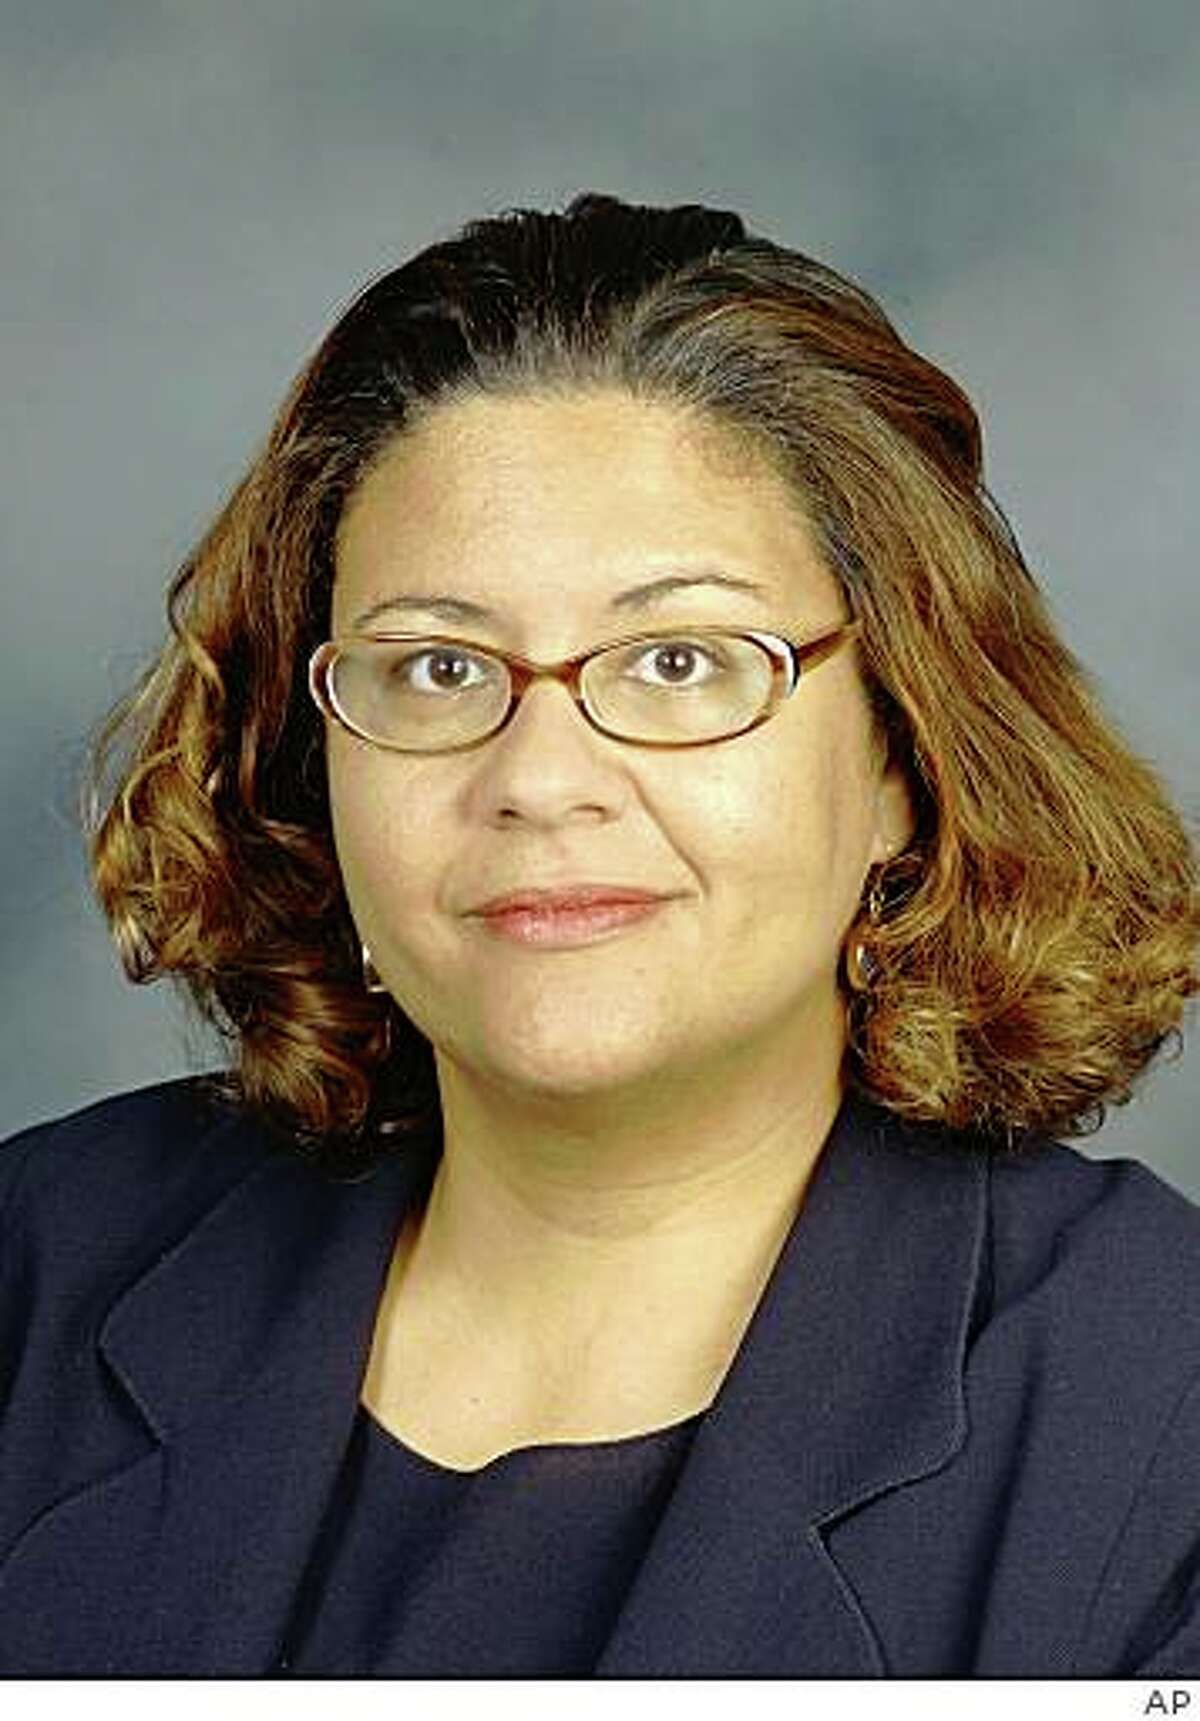 This undated photo provided by Yale University shows Elizabeth Alexander. Alexander, a professor of African-American Studies at Yale University in New Haven, Conn., is to read a poem at the Jan, 2009 inauguration of Barack Obama. (AP Photo/Yale University) ** NO SALES **